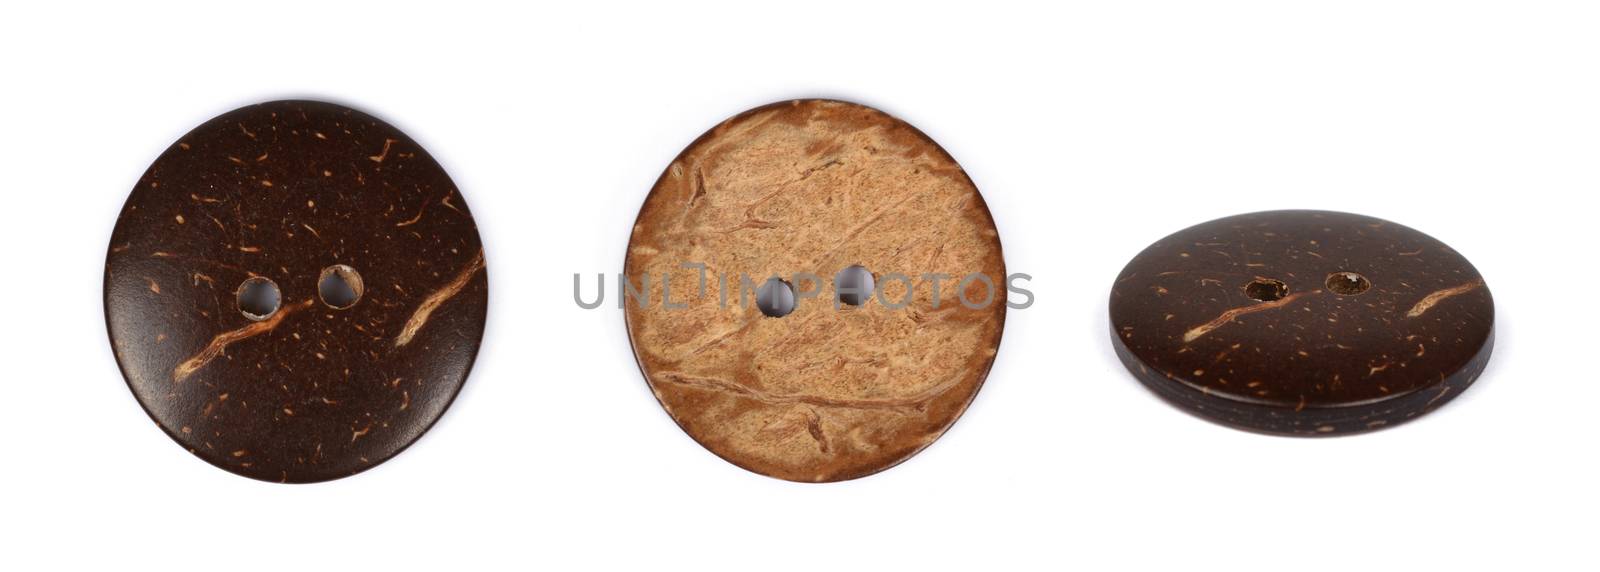 wood coconut brown natural buttons isolated, white background